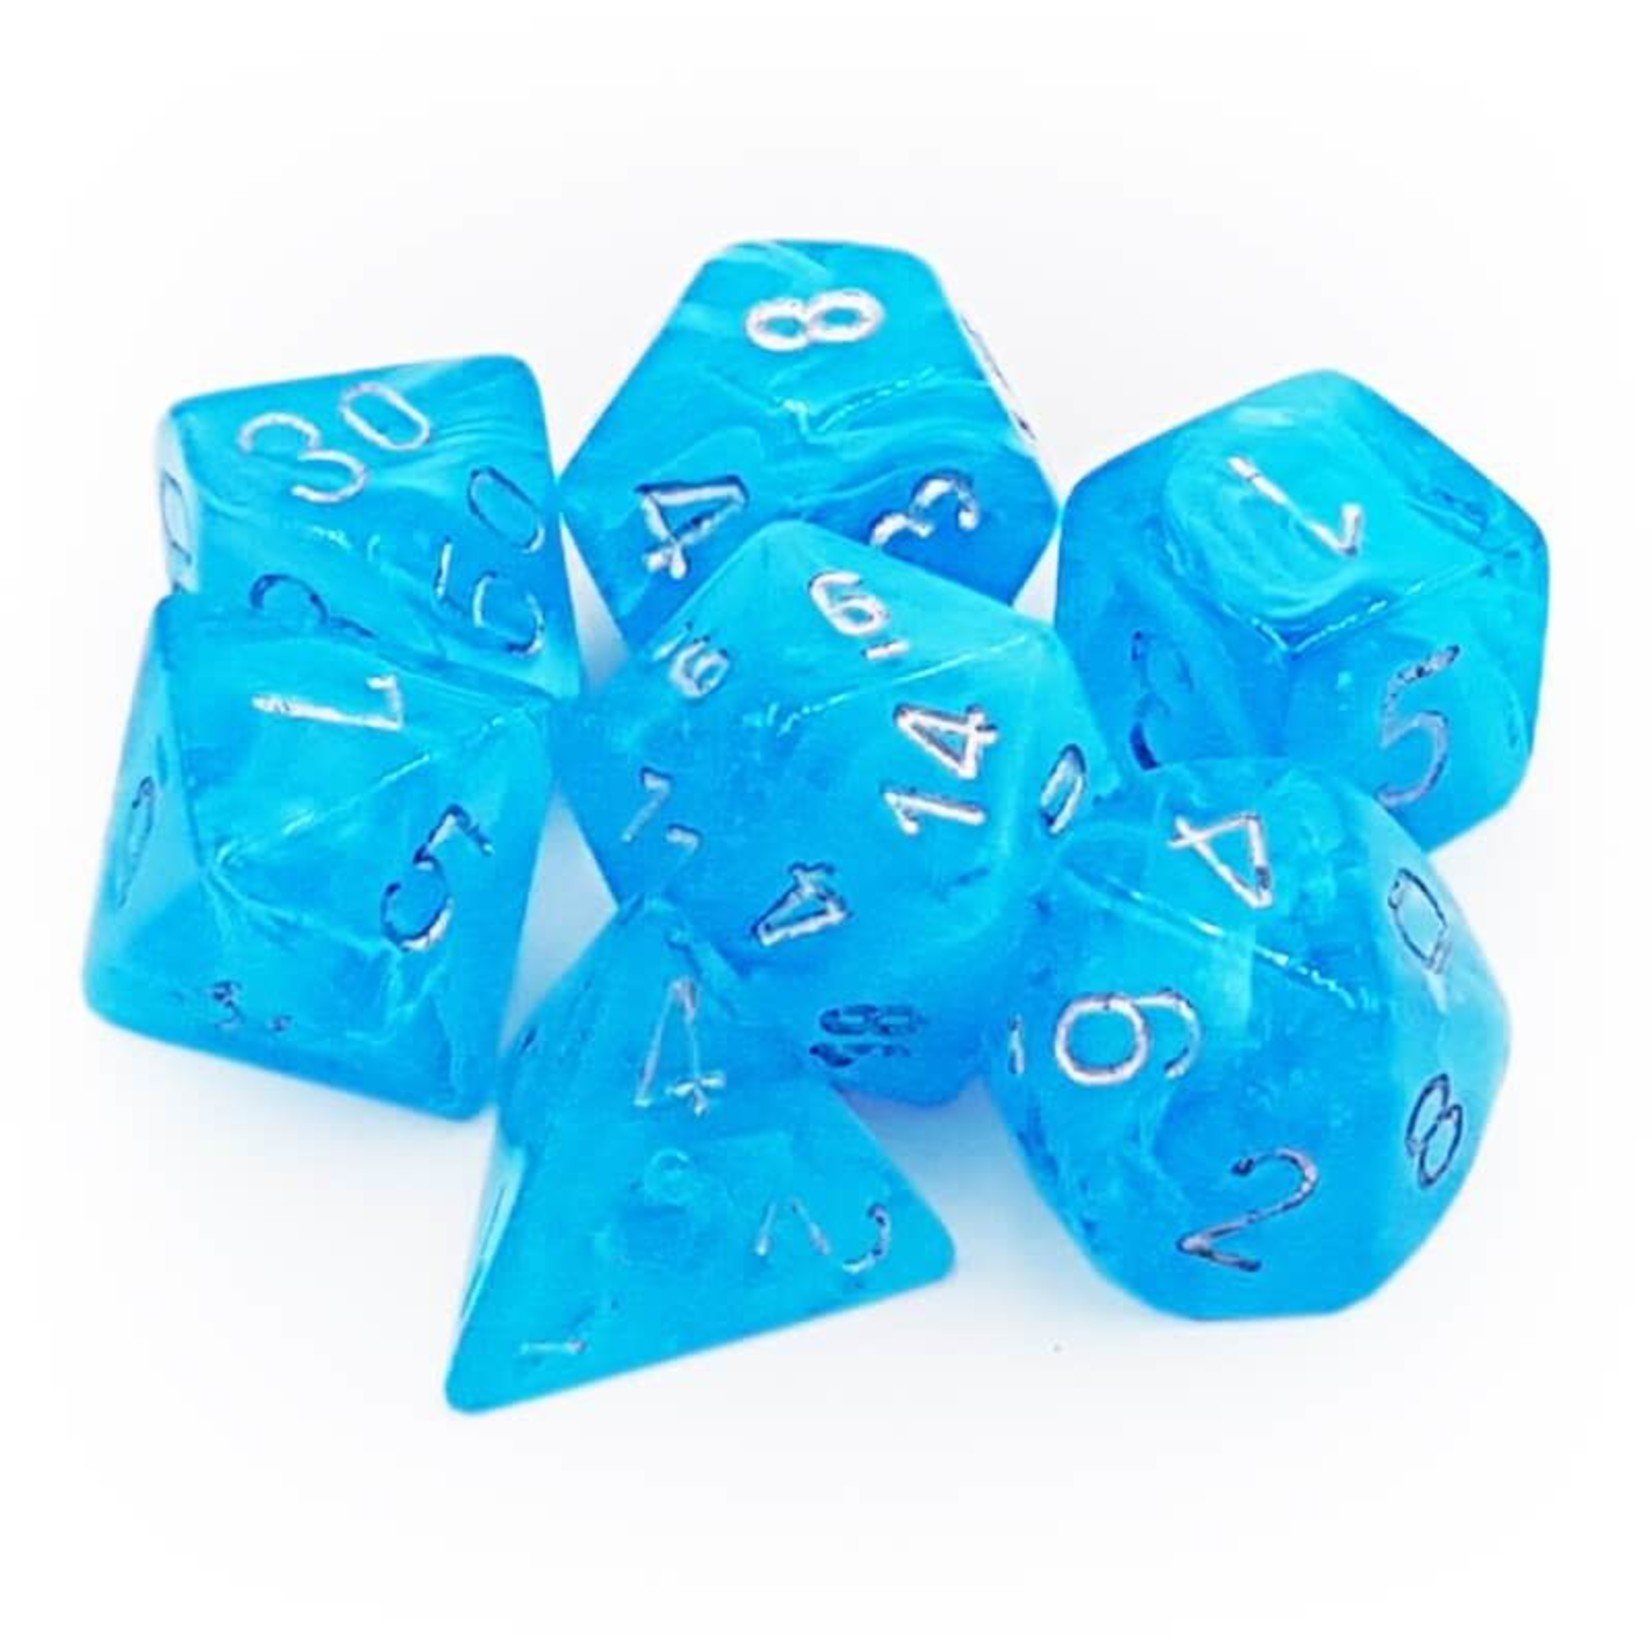 Chessex 7-Piece Dice Set: Luminary Sky Blue with Silver Numbers (Glows in Dark)